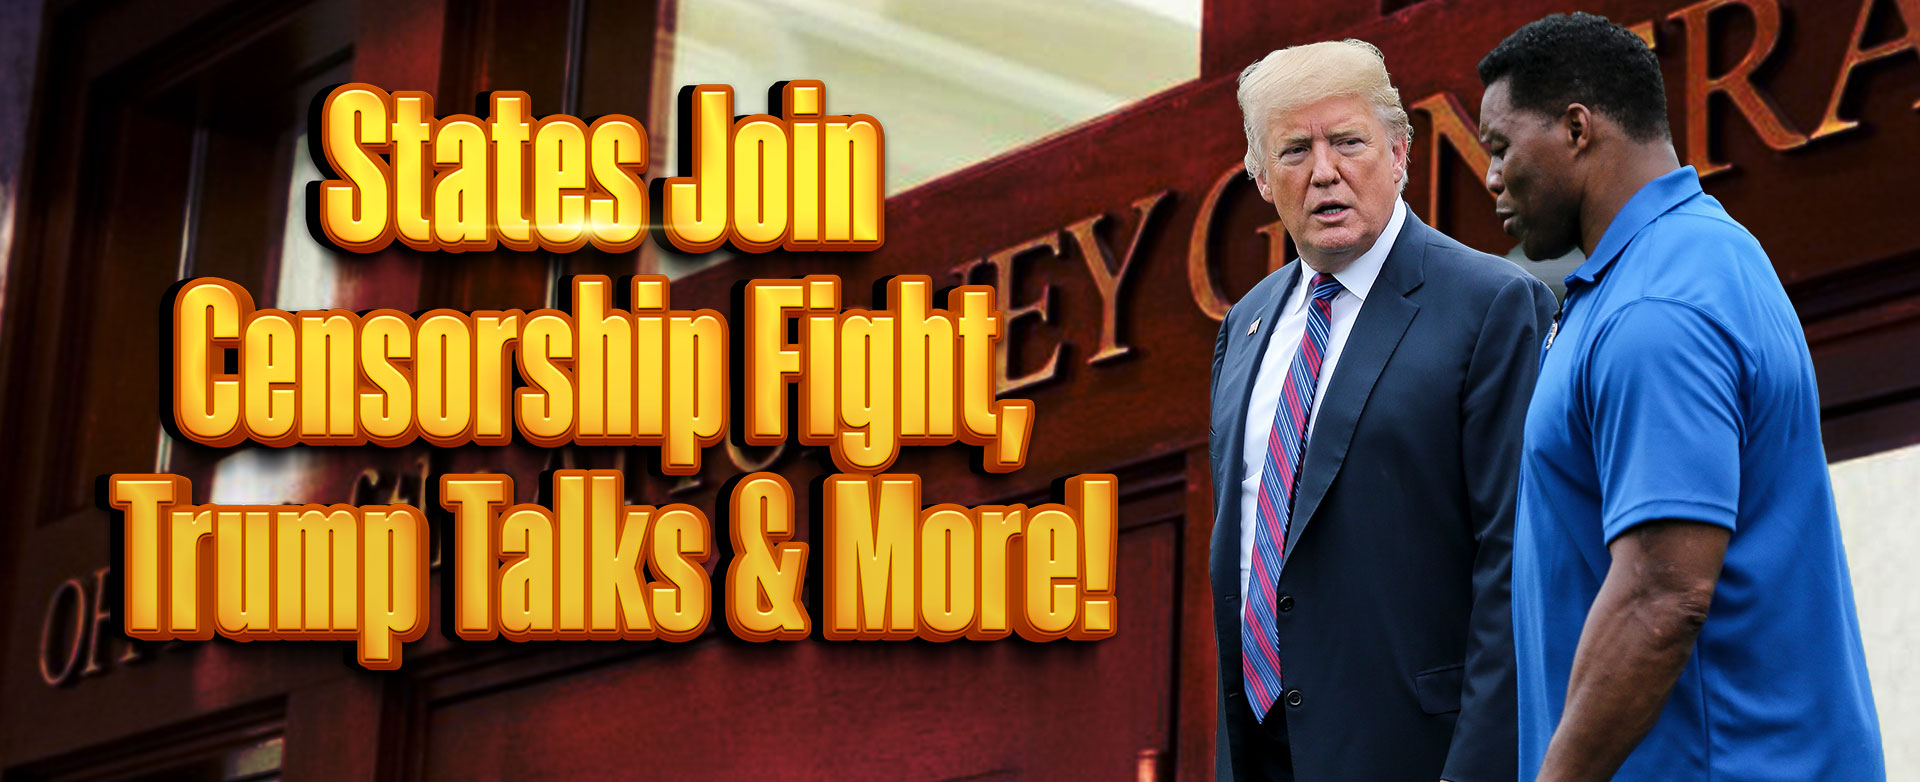 MyPatriotsNetwork-States Join Censorship Fight, Trump Talks & More! March 11, 2021 Update